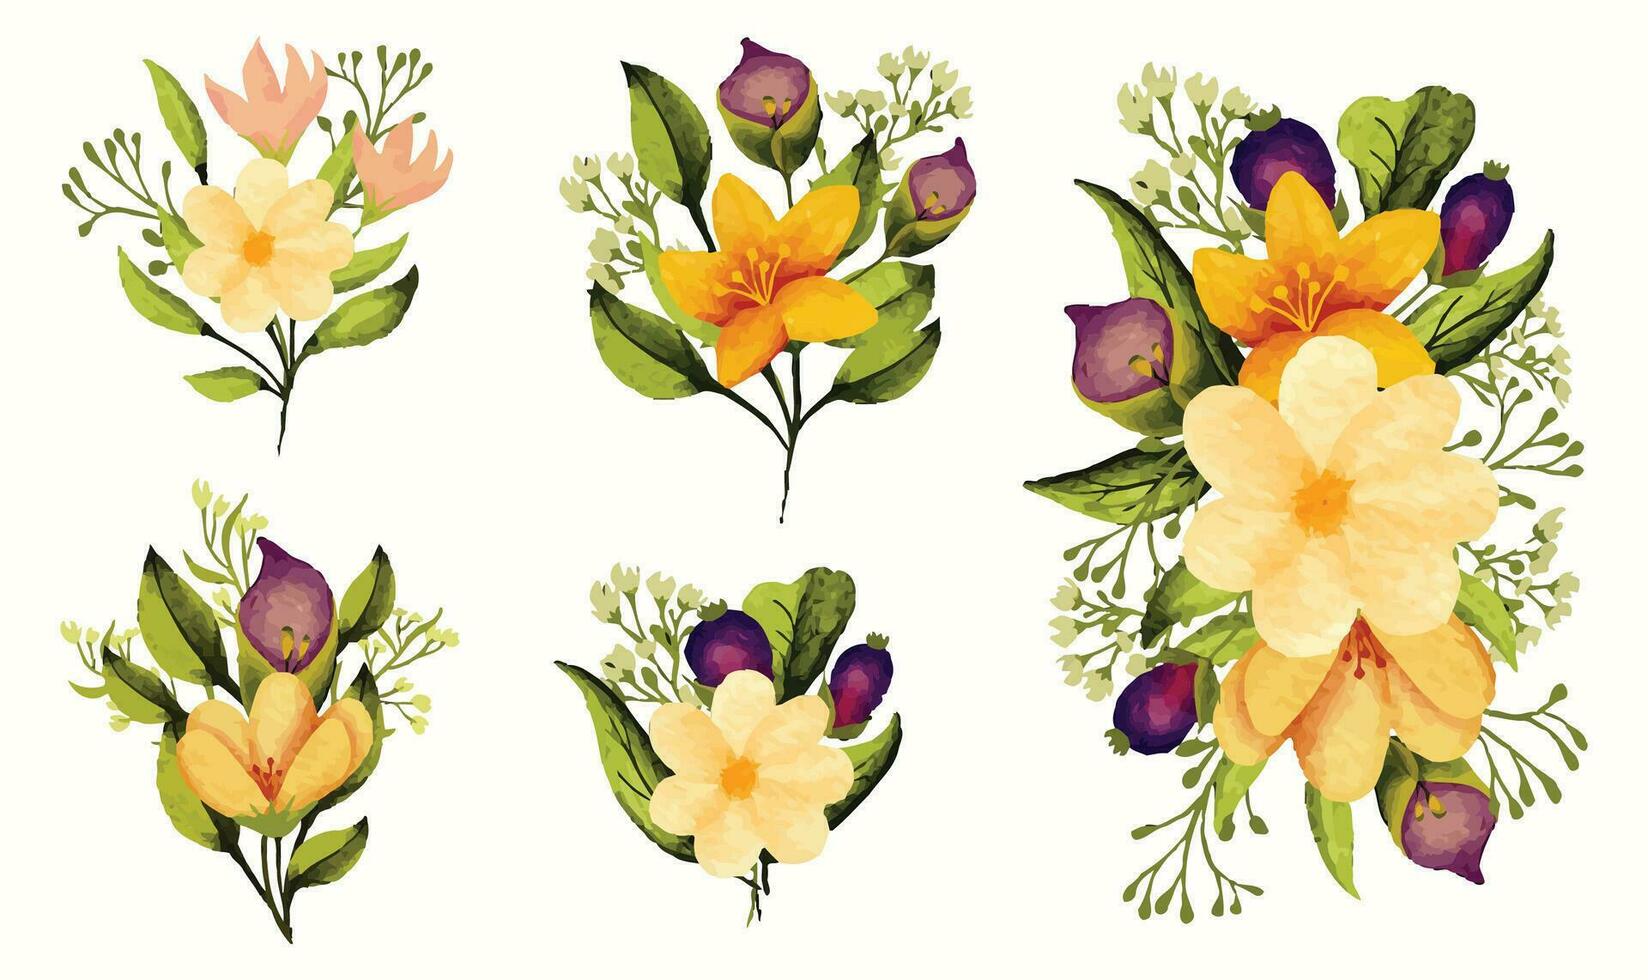 Watercolor wild flower branch illustration with floral bouquet vector